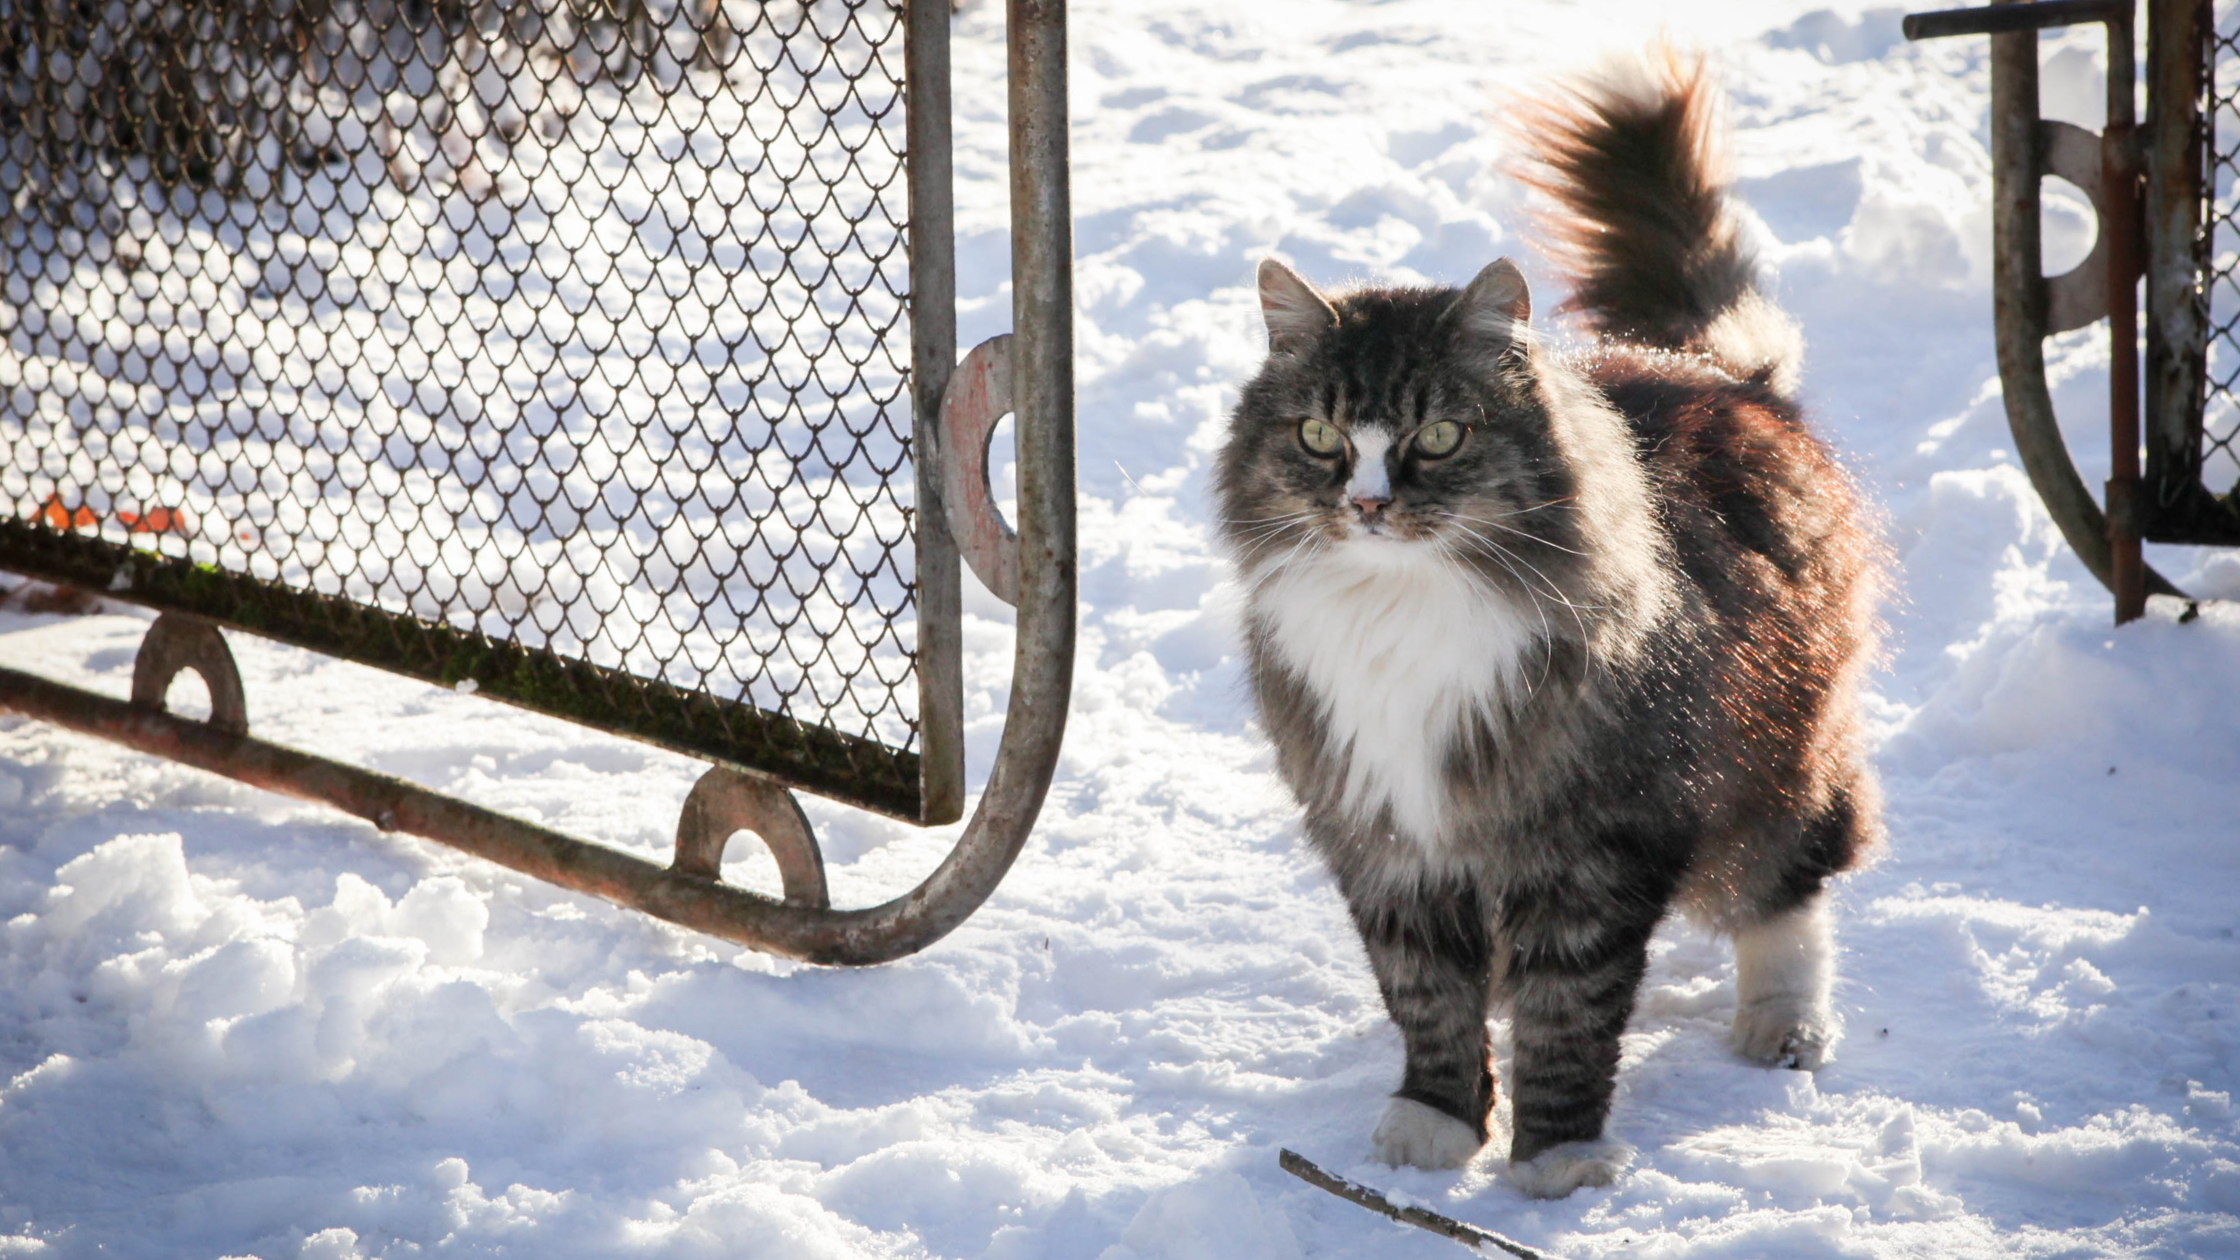 cat in a snowy ground walking away from gate